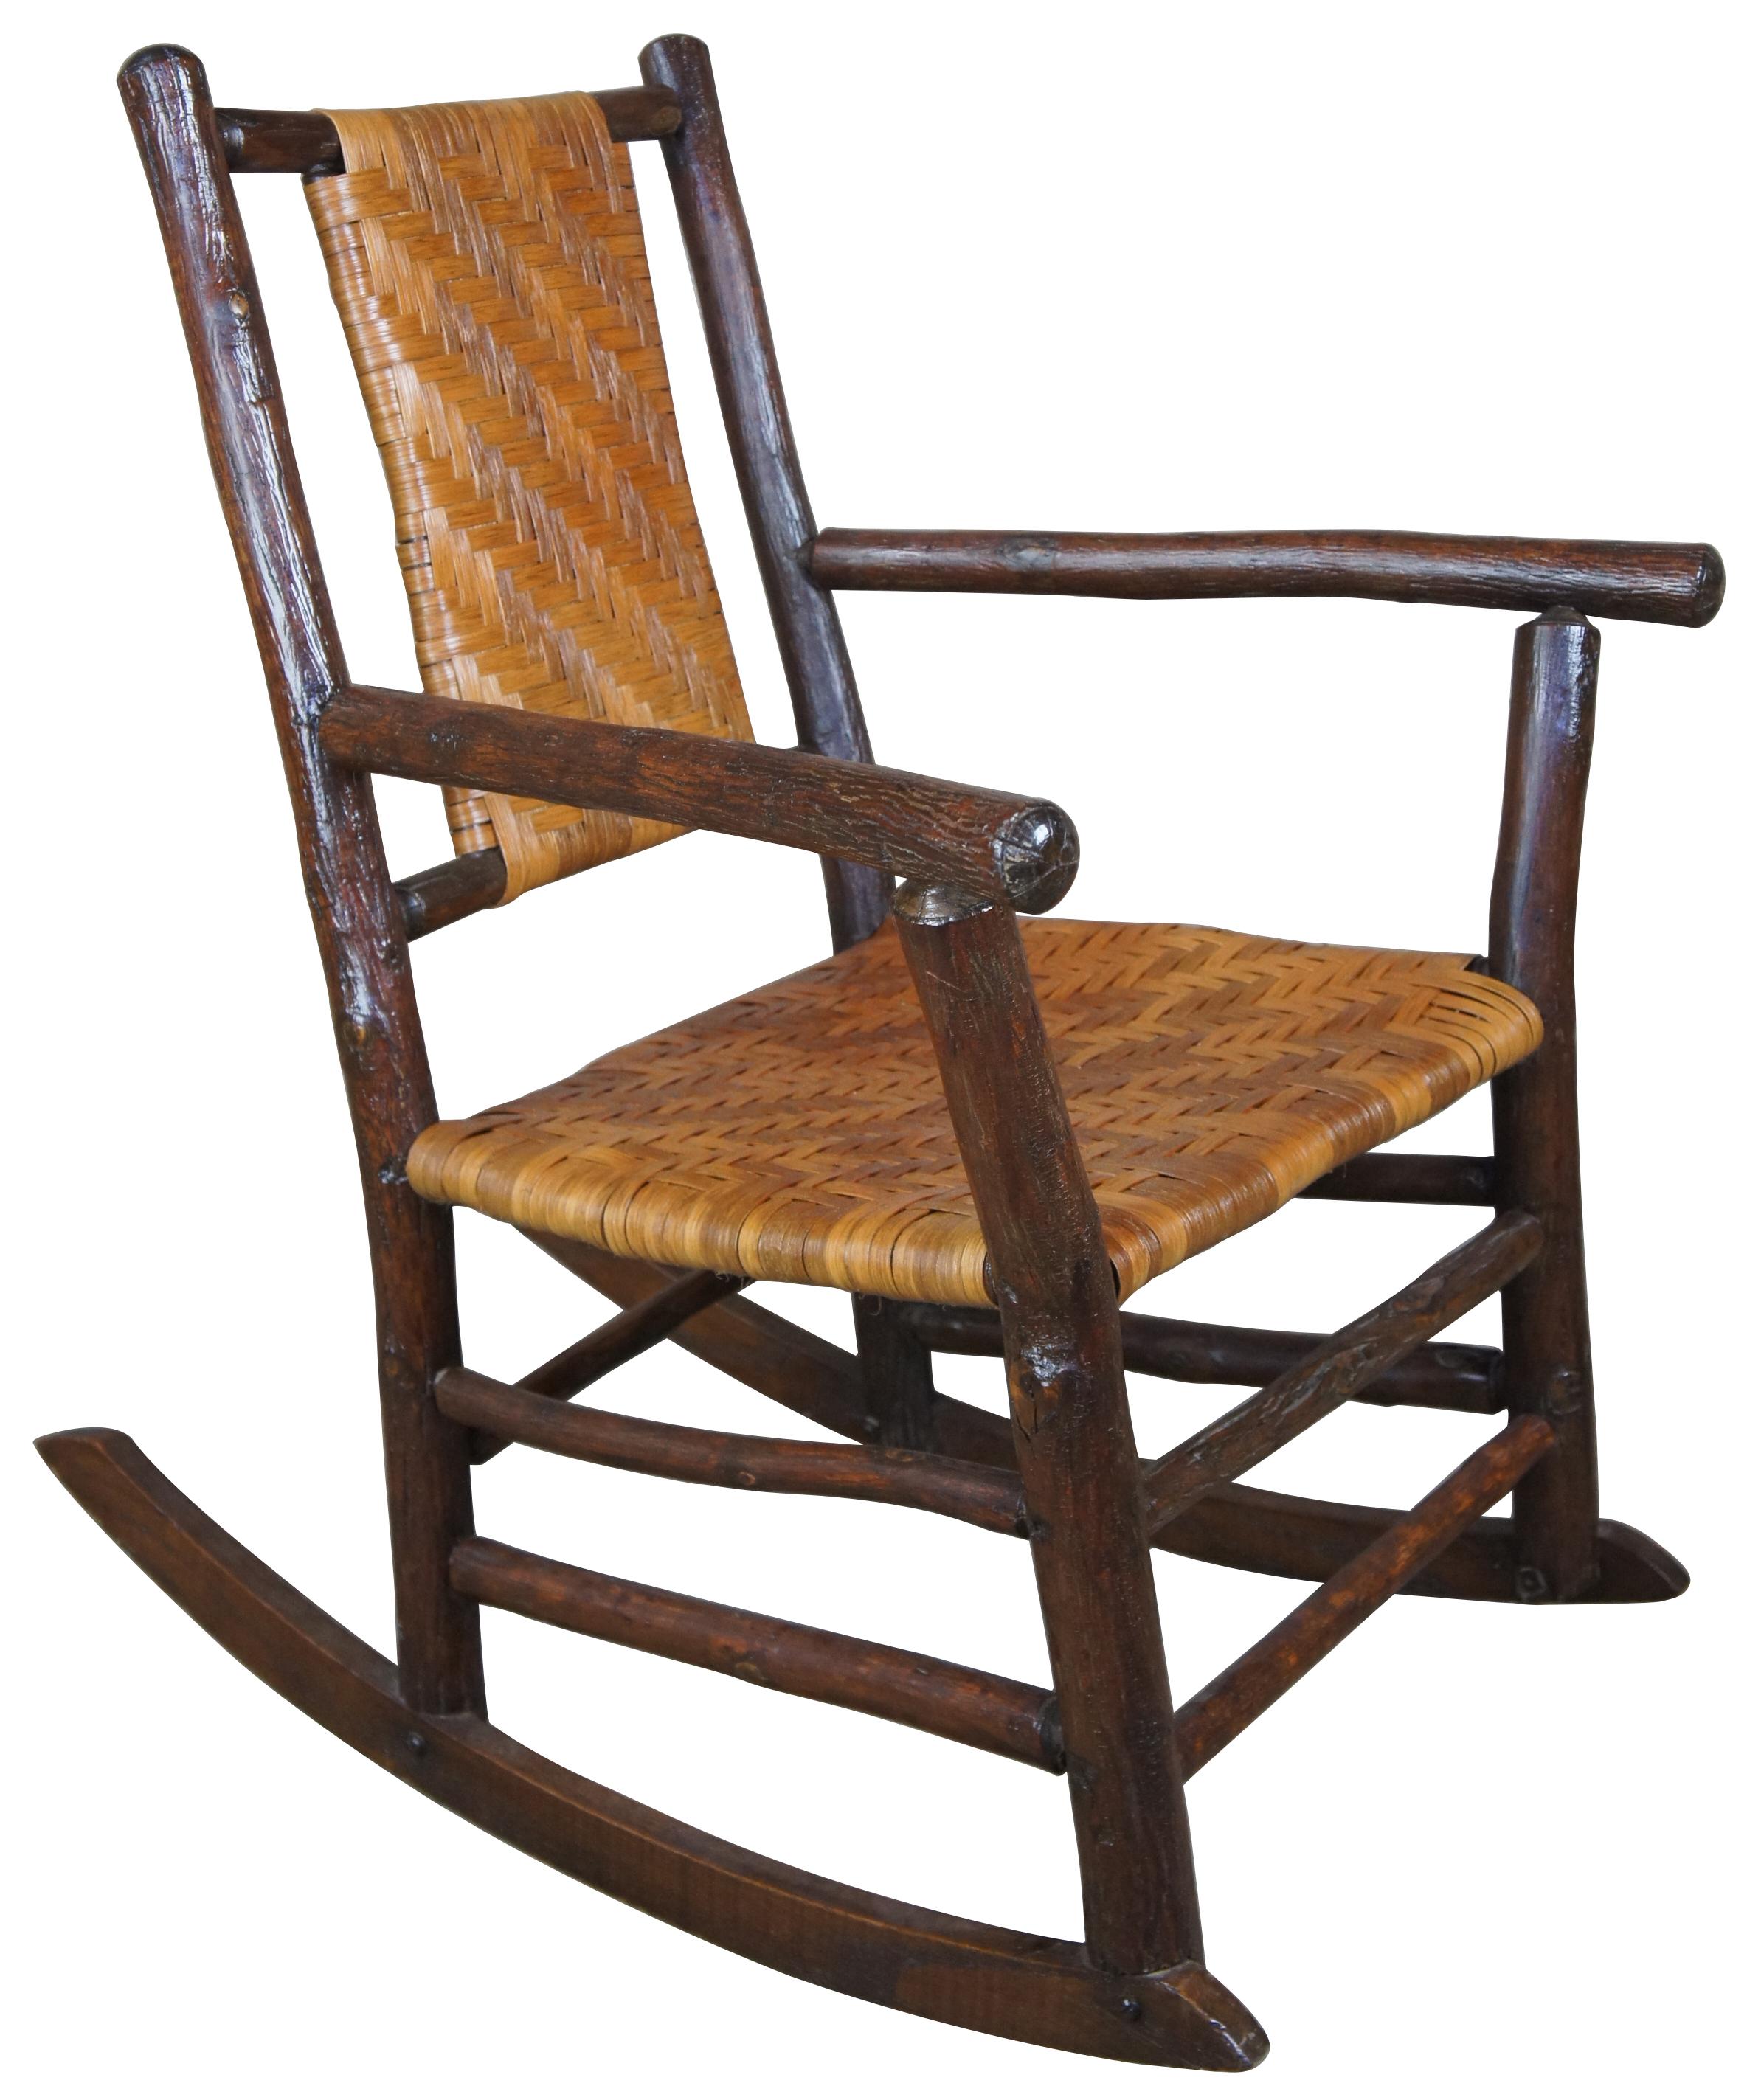 Rustic Hickory Furniture Company rocking armchair no. 21 Rocker Adirondak Lodge

Pre 1930s rocking chair by The Rustic Hickory Furniture Company. Features a primitive log and rattan style with flared arms and a nice wide seat. The Rustic Hickory